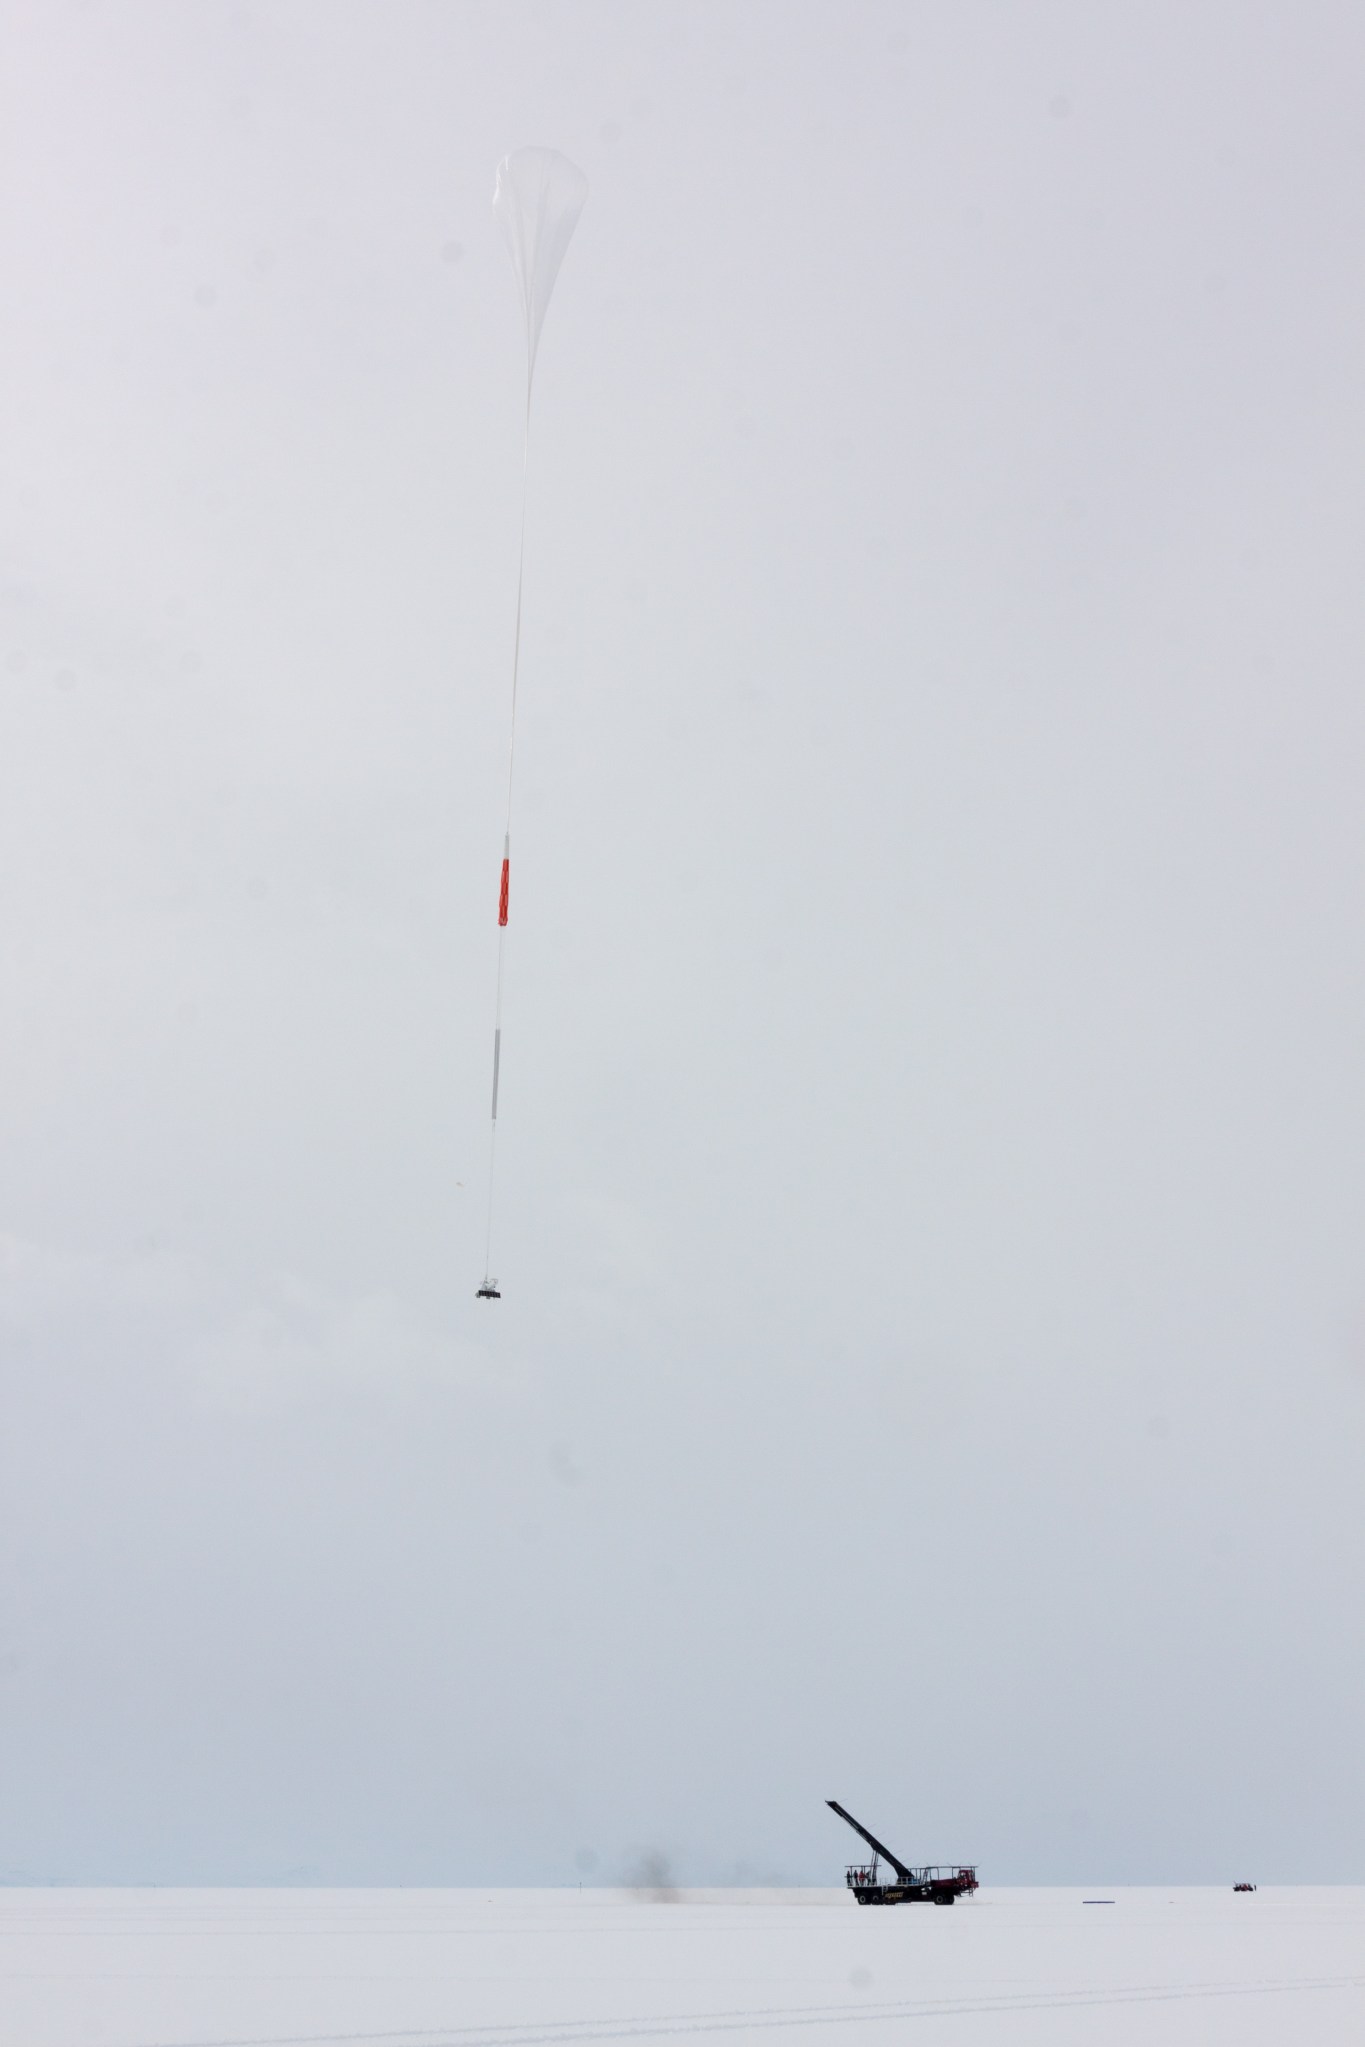 launch of GRIPS balloon payload from Antarctica on Jan 18, 2016